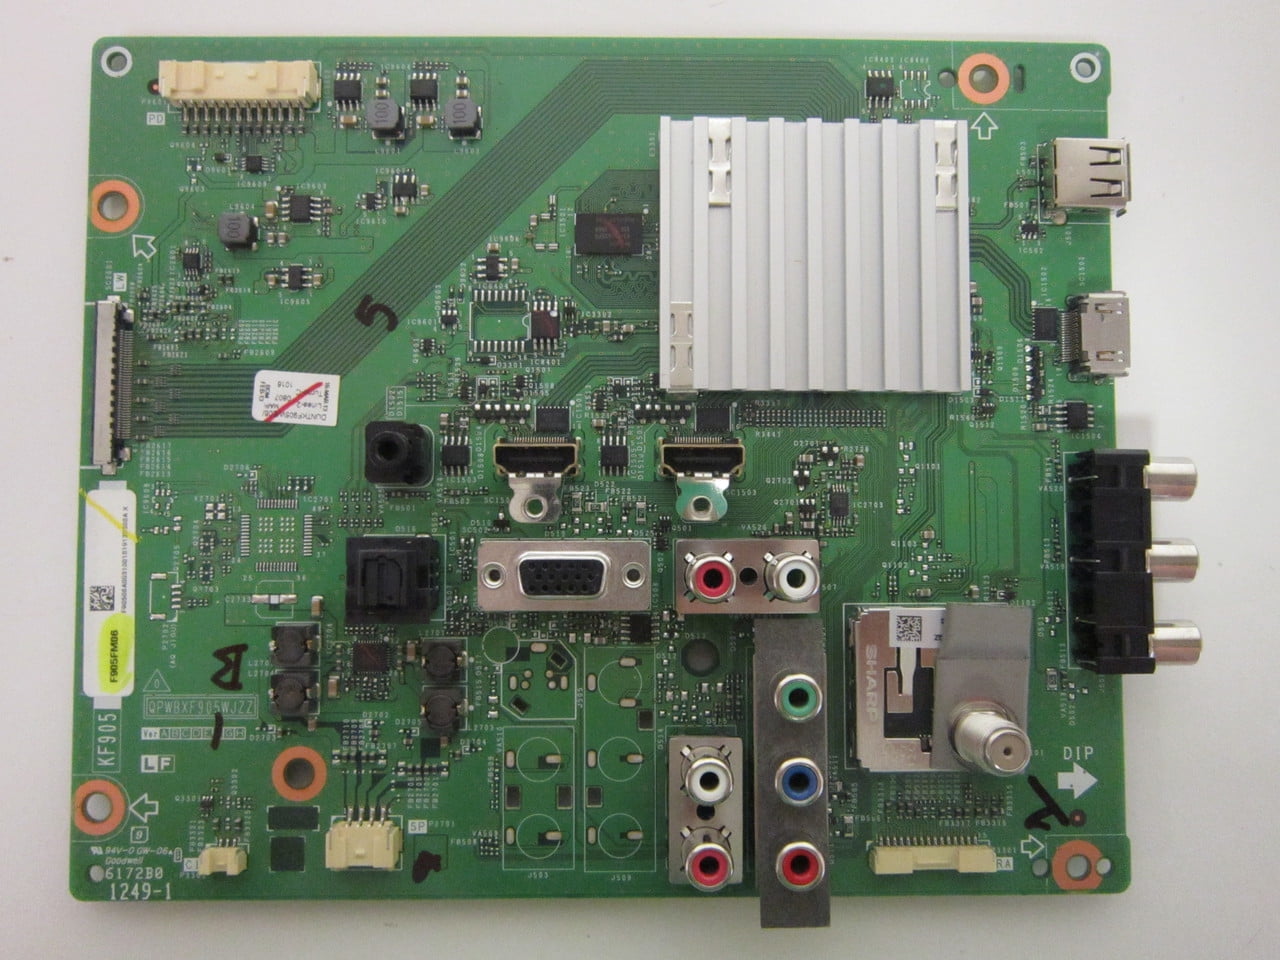 SHARP DKEYMF905FM06 F905FM06 MAIN BOARD FOR LC-70LE550U AND OTHER MODELS